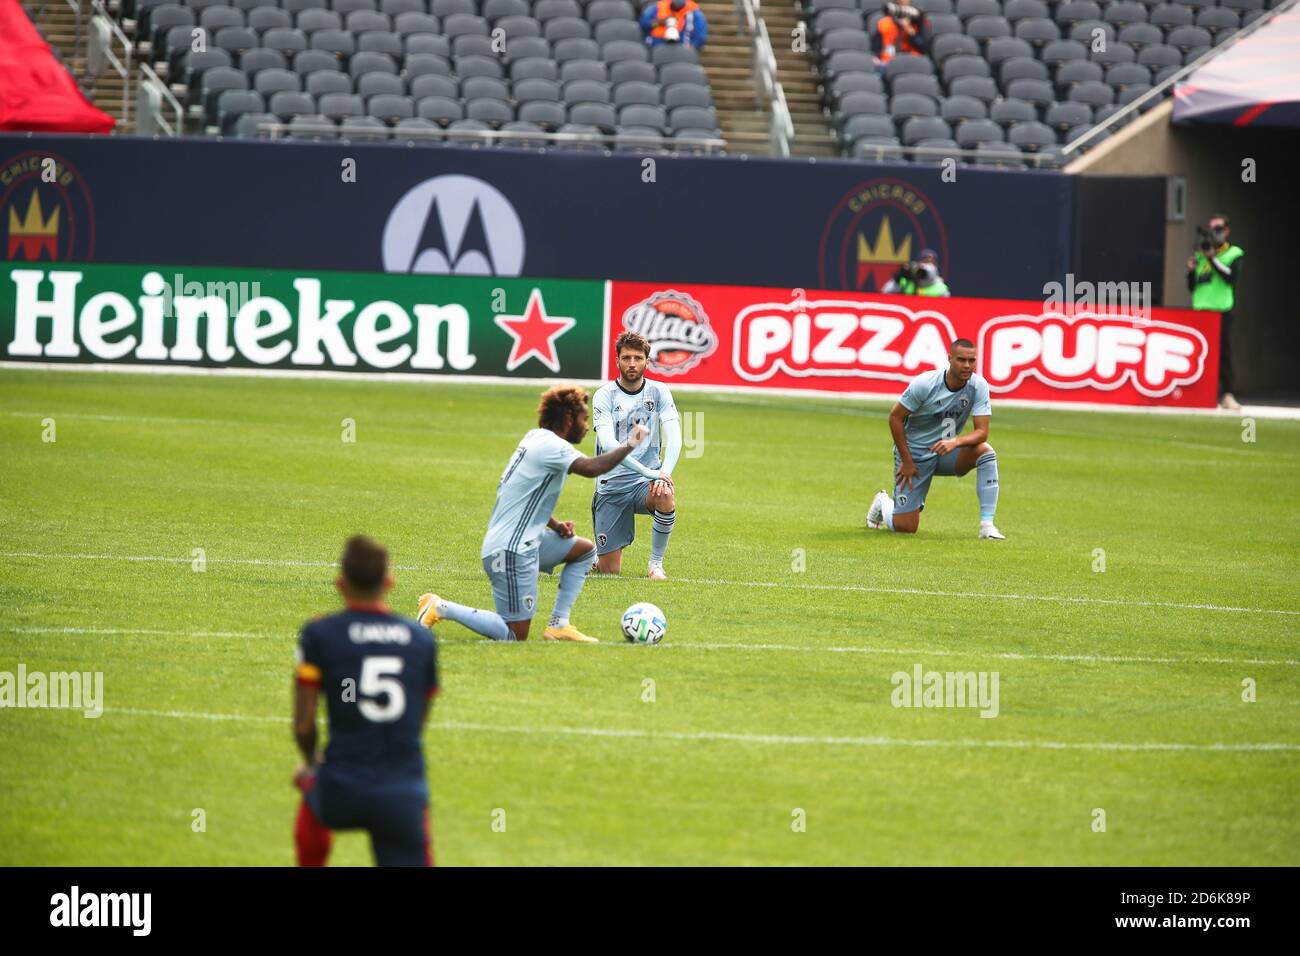 Chicago, United States . 17th Oct, 2020. Sporting KC players kneel during a MLS match against the Chicago Fire FC at Solider Field, Saturday, Oct. 17, 2020, in Chicago, Illinois . The Fire tie Sporting KC 2-2 (IOS/ESPA-Images) Credit: European Sports Photo Agency/Alamy Live News Stock Photo